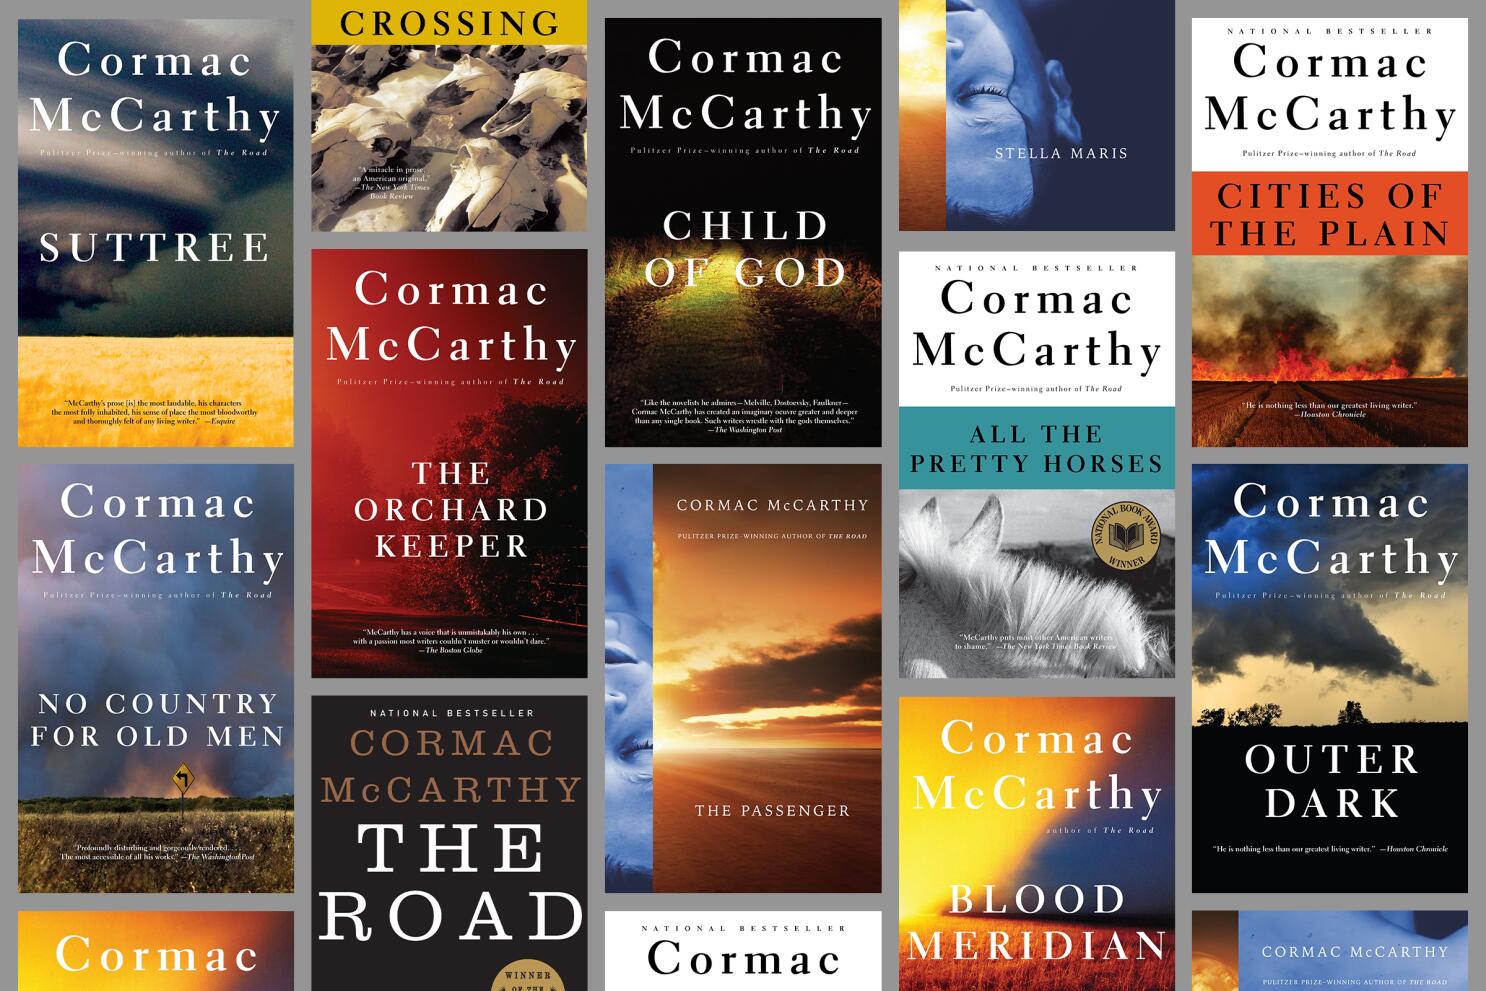 How Cormac McCarthy illuminated a path through the darkness - Los